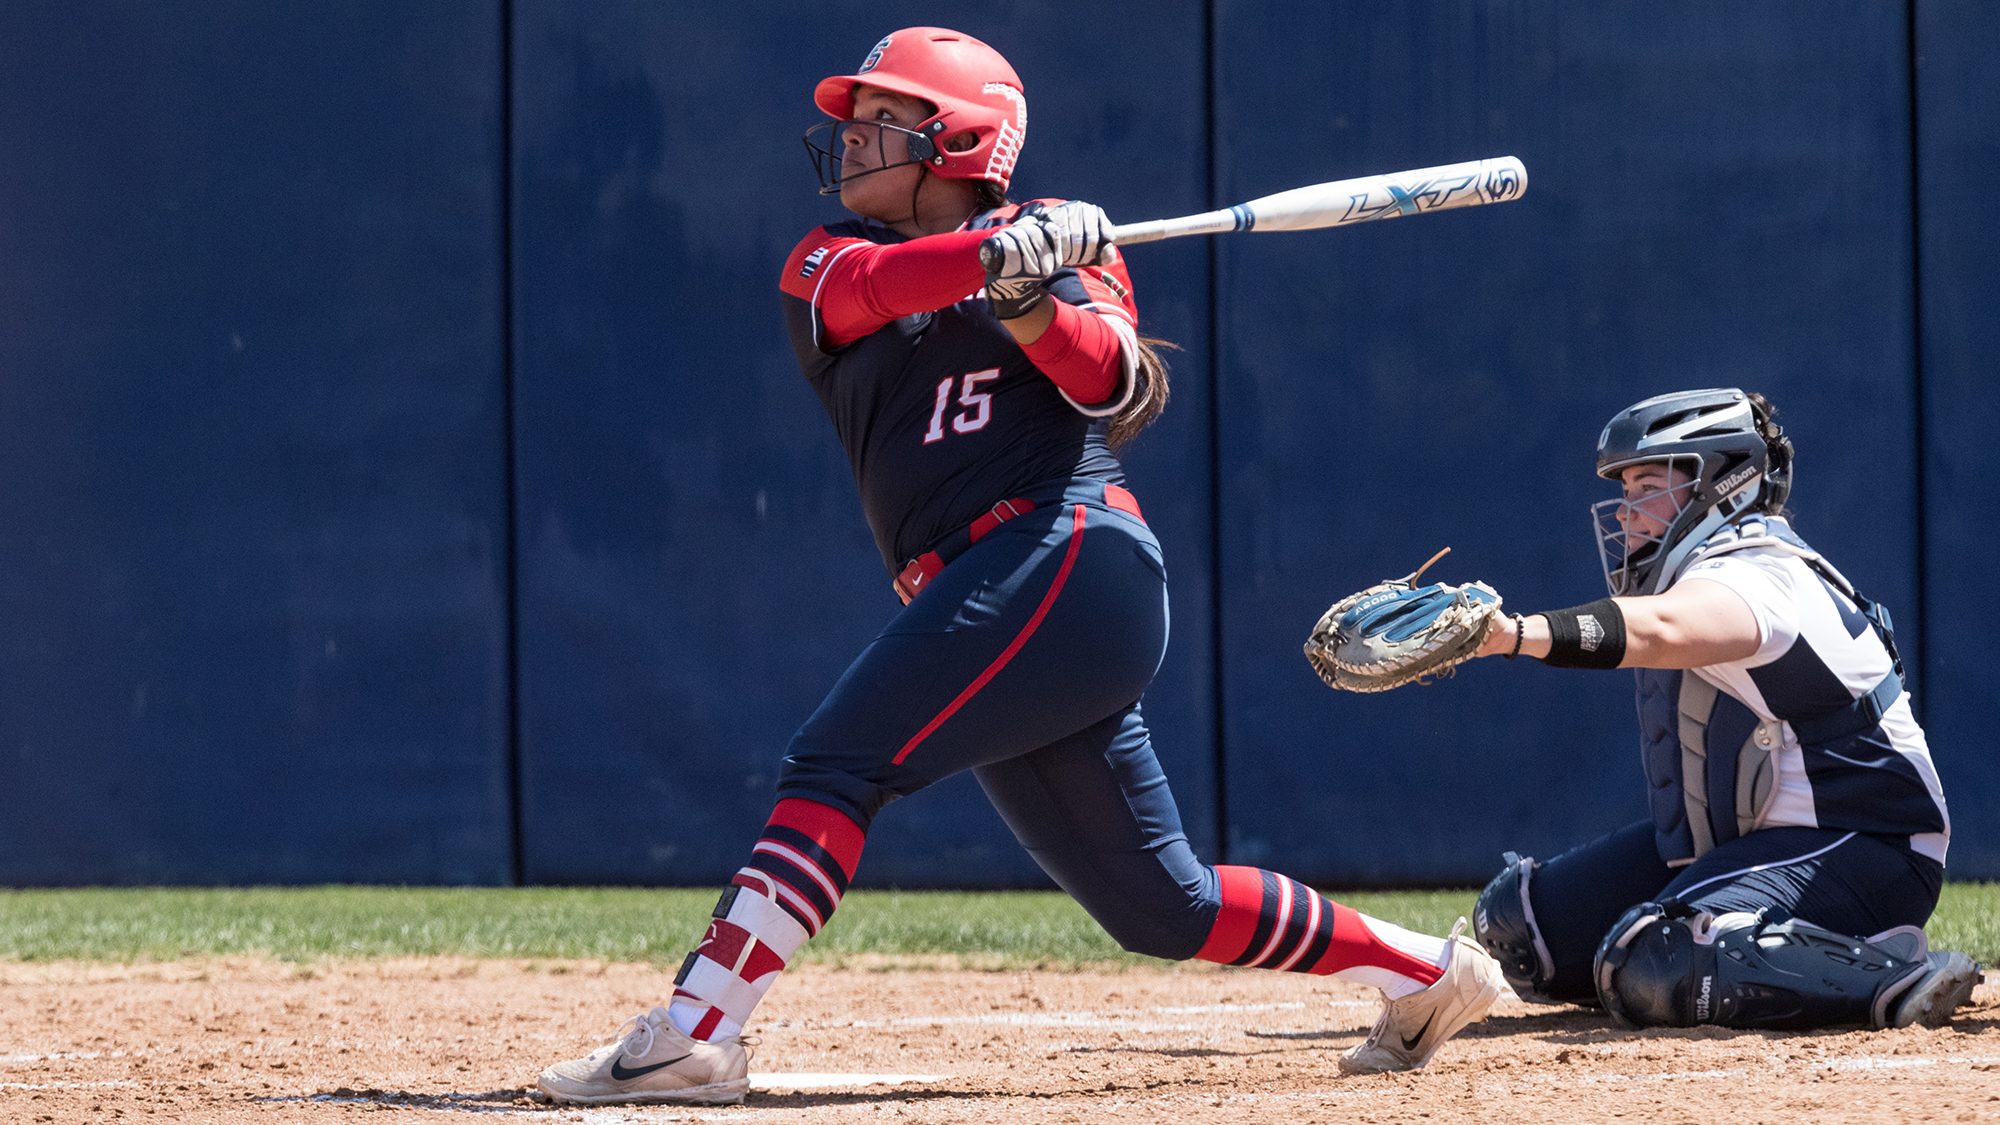 Hayleigh Galvan (Cherokee) went 2-for-3 with a solo home run to lead the Fresno State ‘Dogs offensively on Saturday